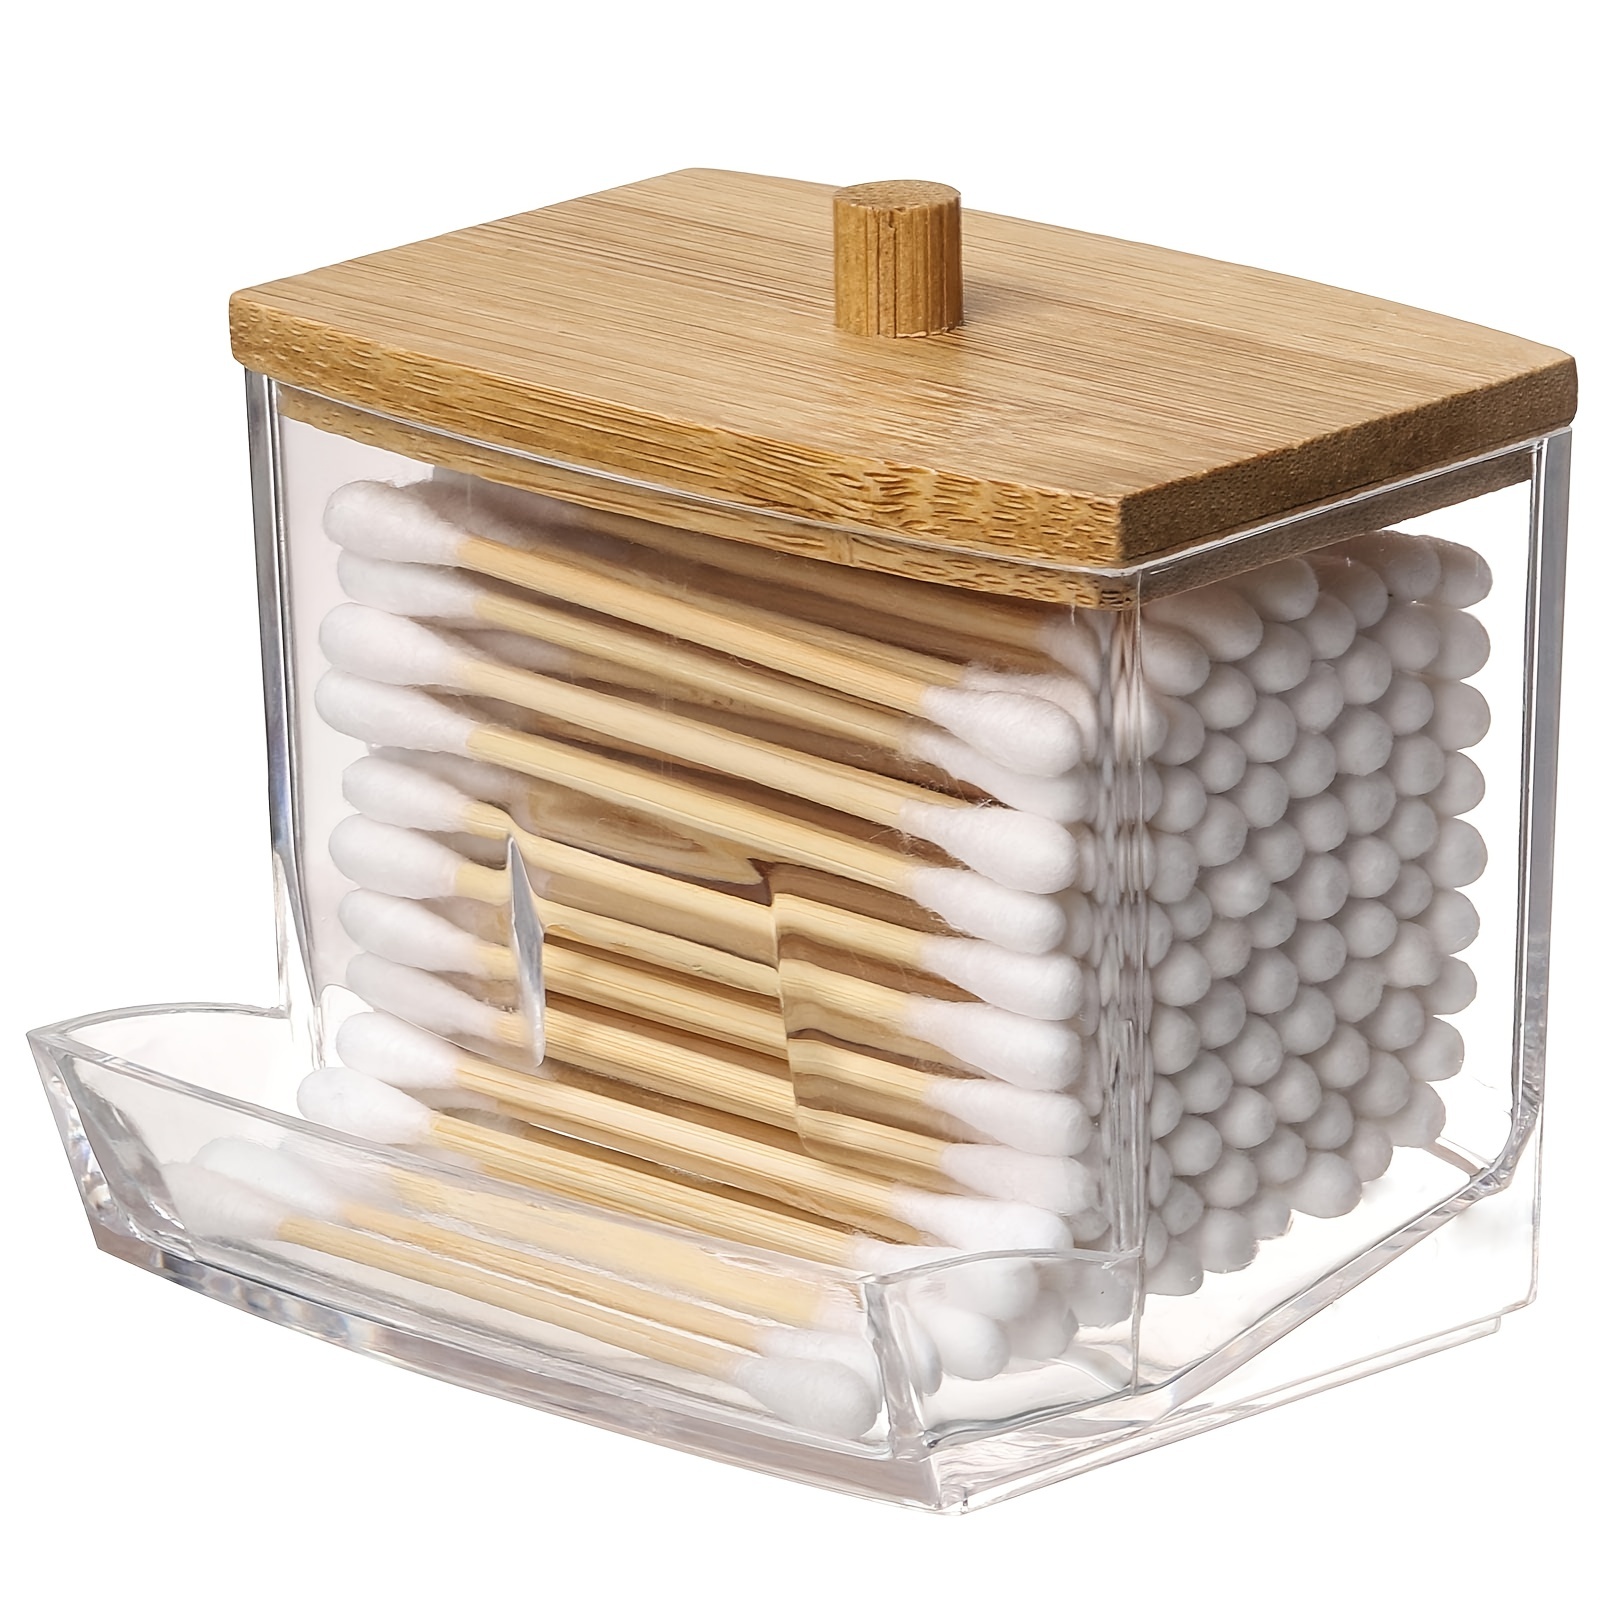 1pc 7 OZ Cotton Swab Pads Holder - Best Price & Deals on Home & Kitchen Products